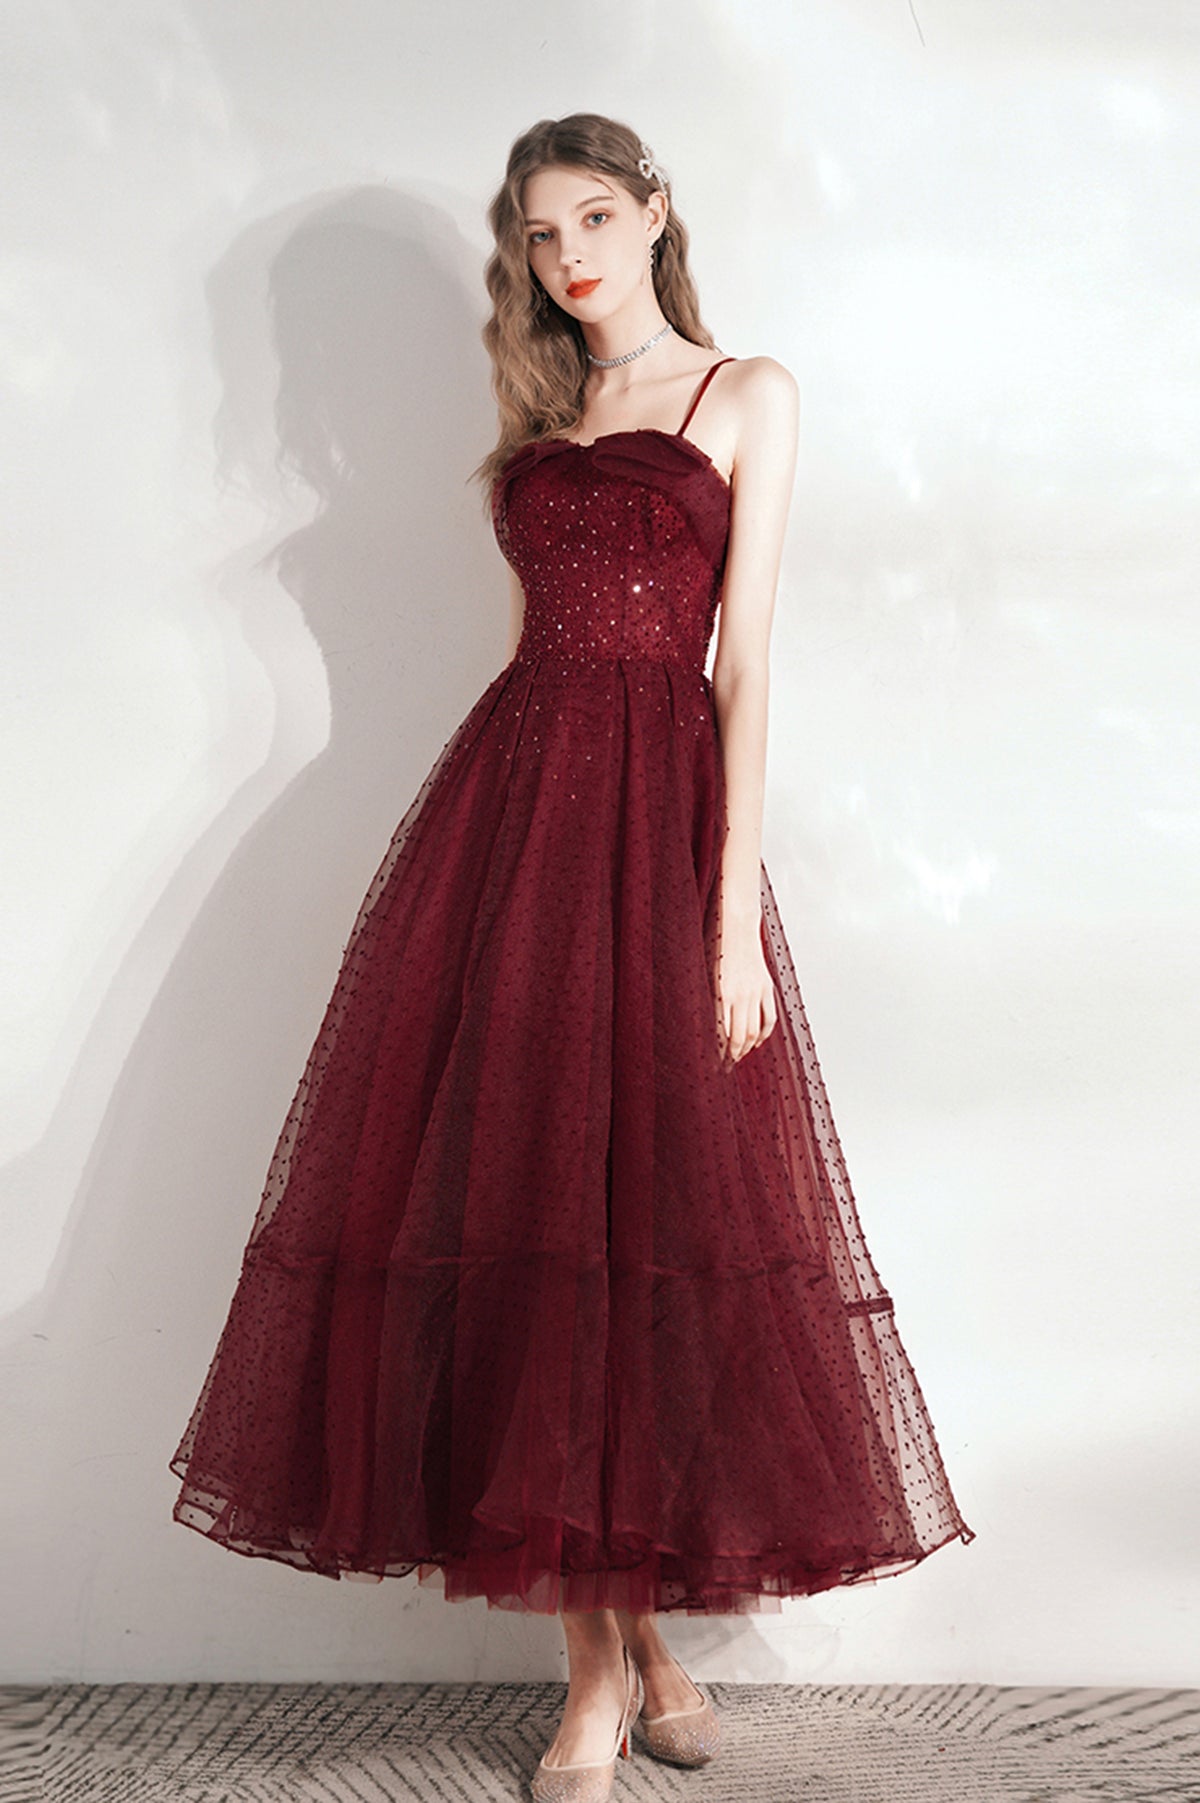 Burgundy Tulle Sequins Short Prom Dress, A-Line Homecoming Party Dress